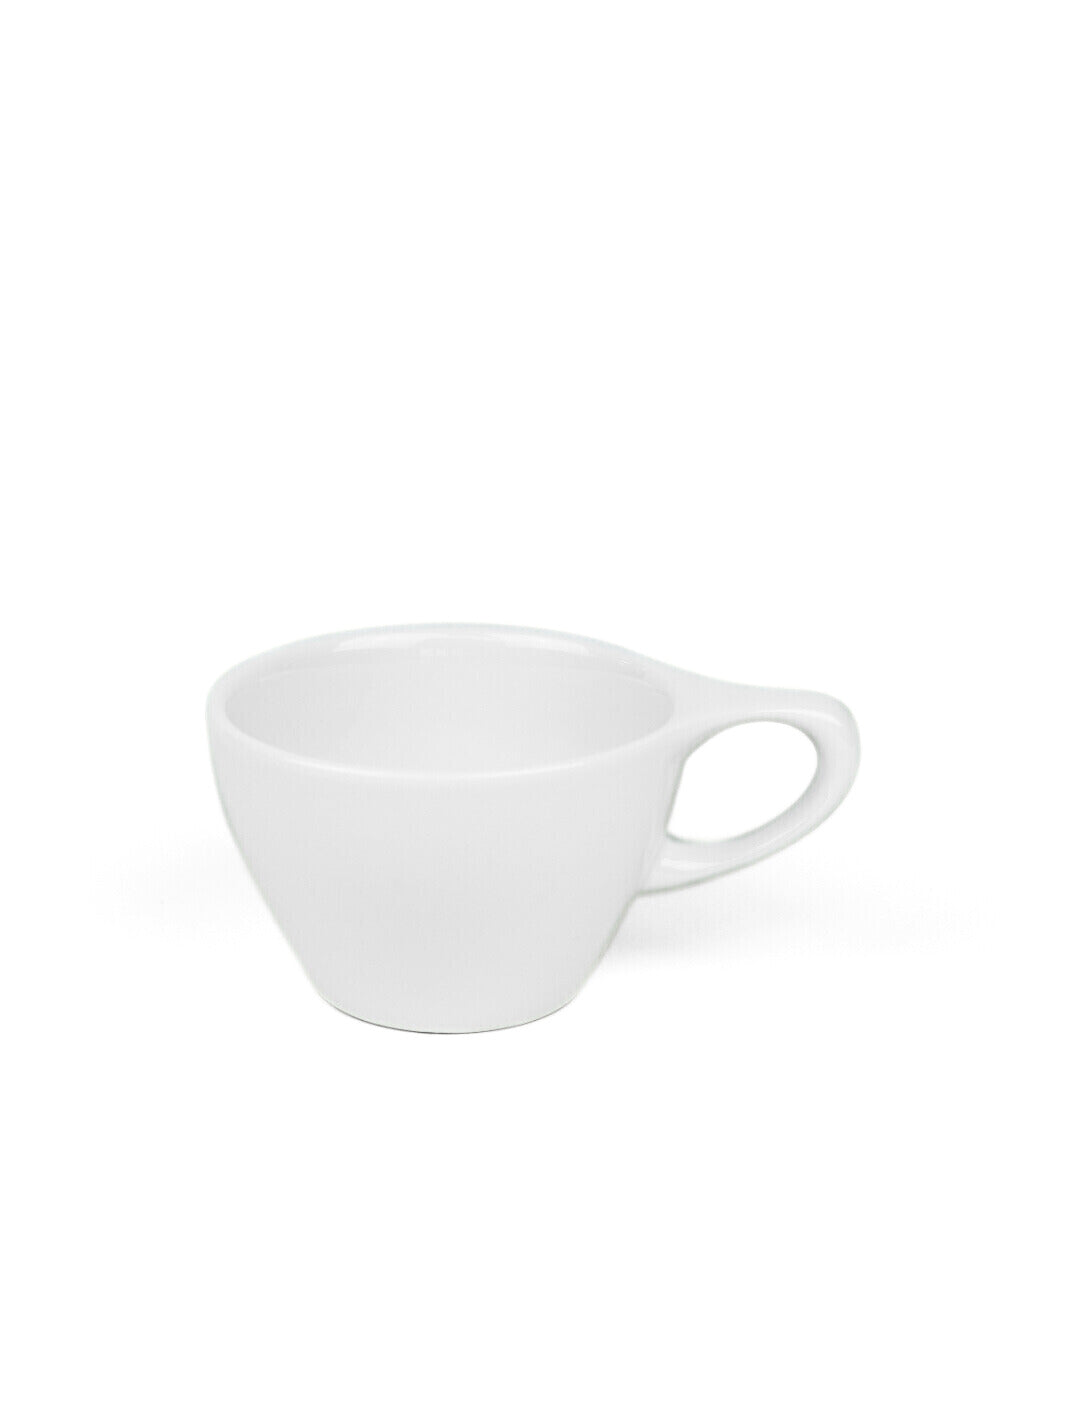 notNeutral LINO Small Latte Cup (8oz/237ml) (White) (Minor Aesthetic Defect)